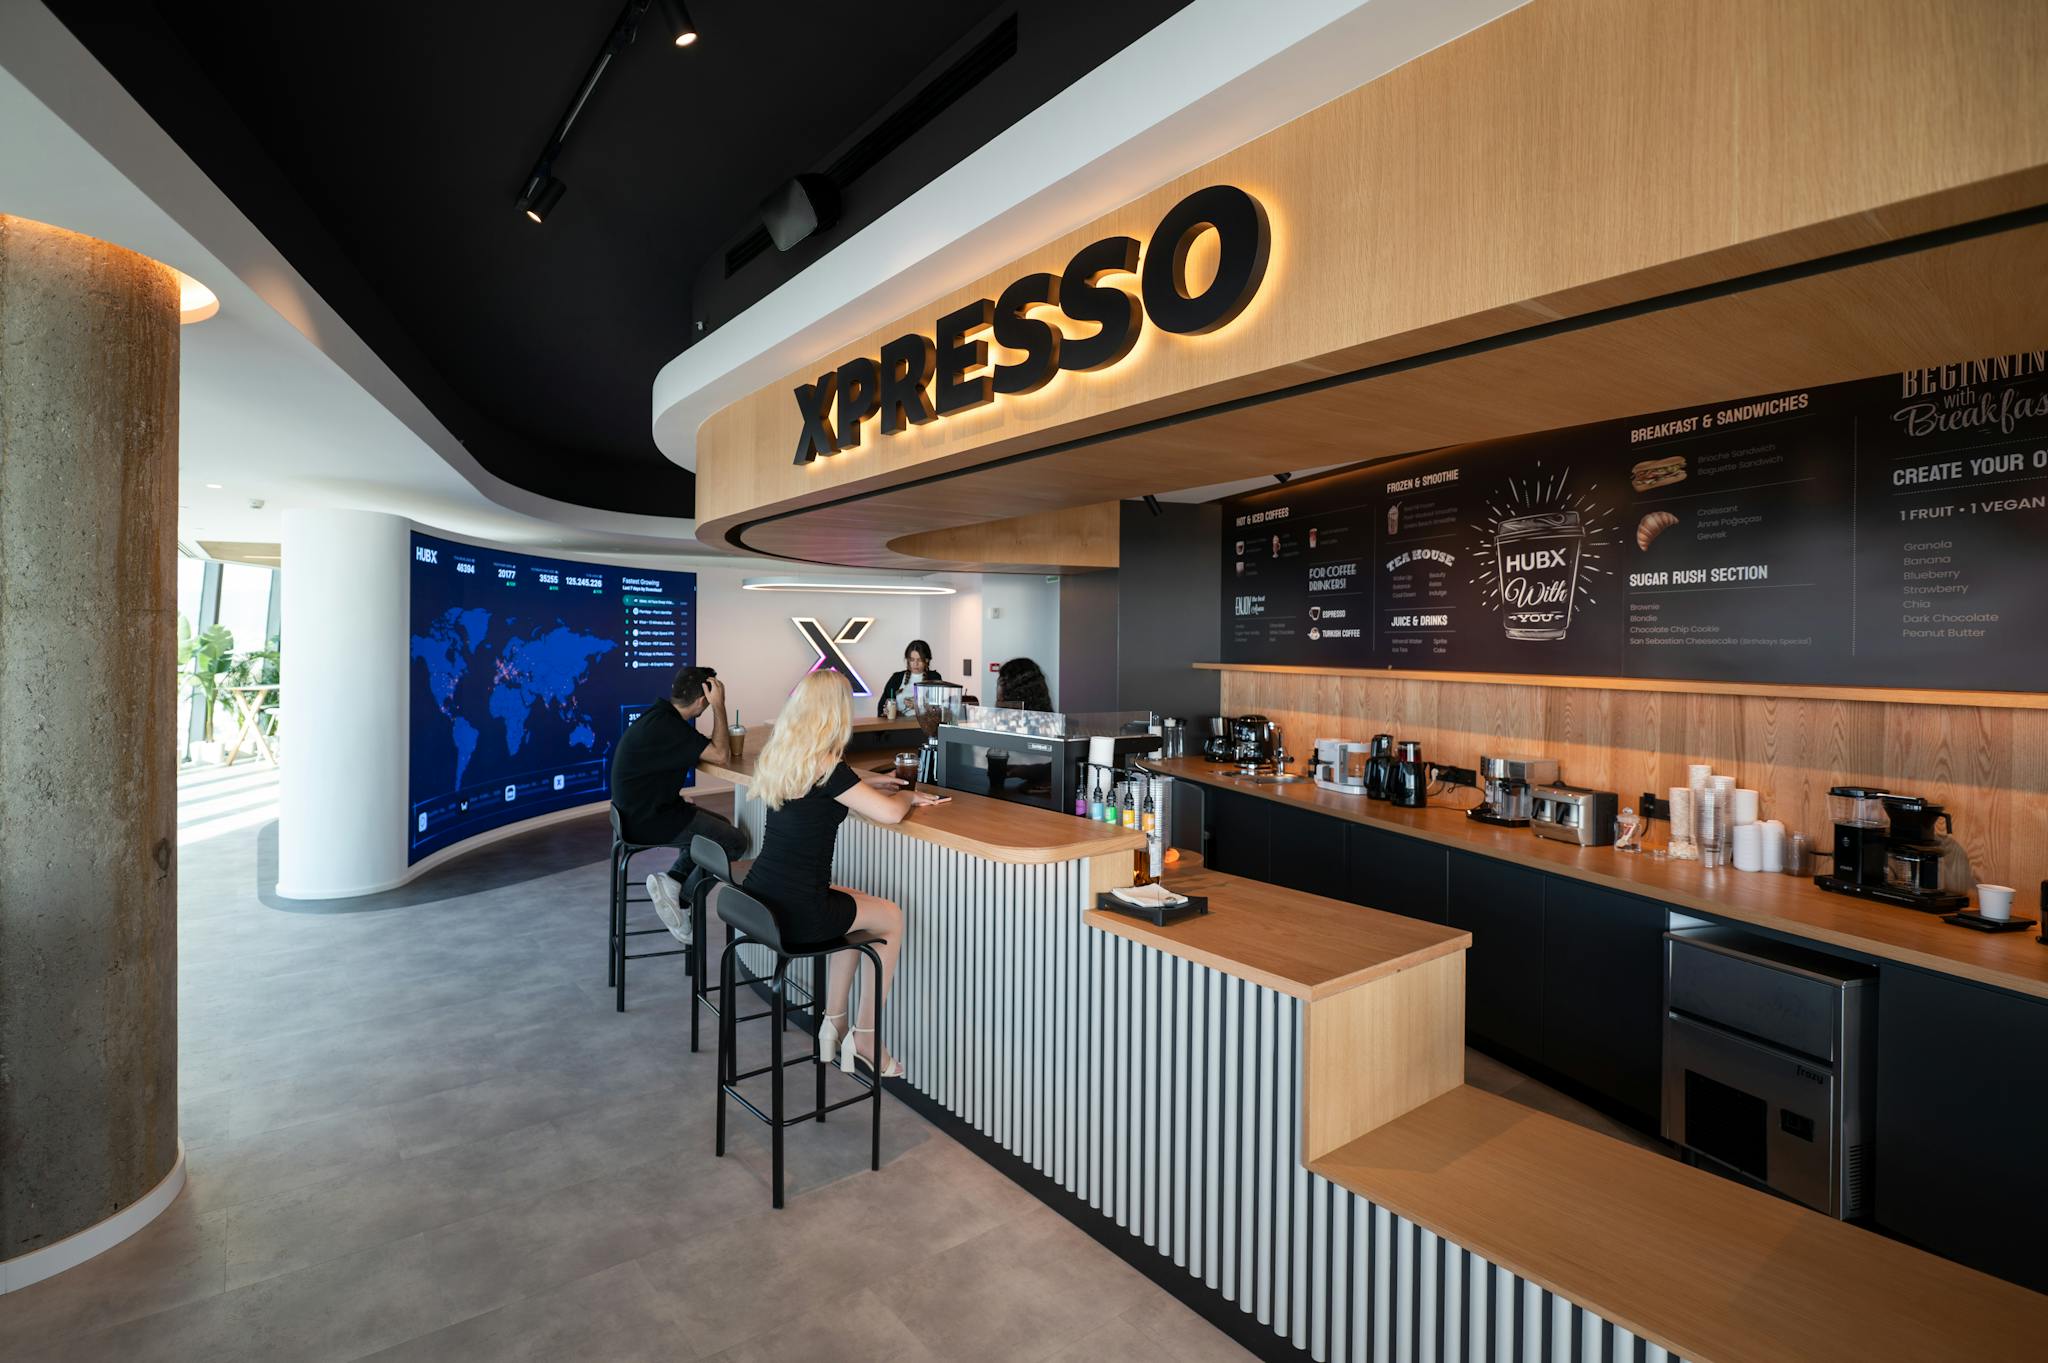 XPresso - Our in-house health bar and coffee shop